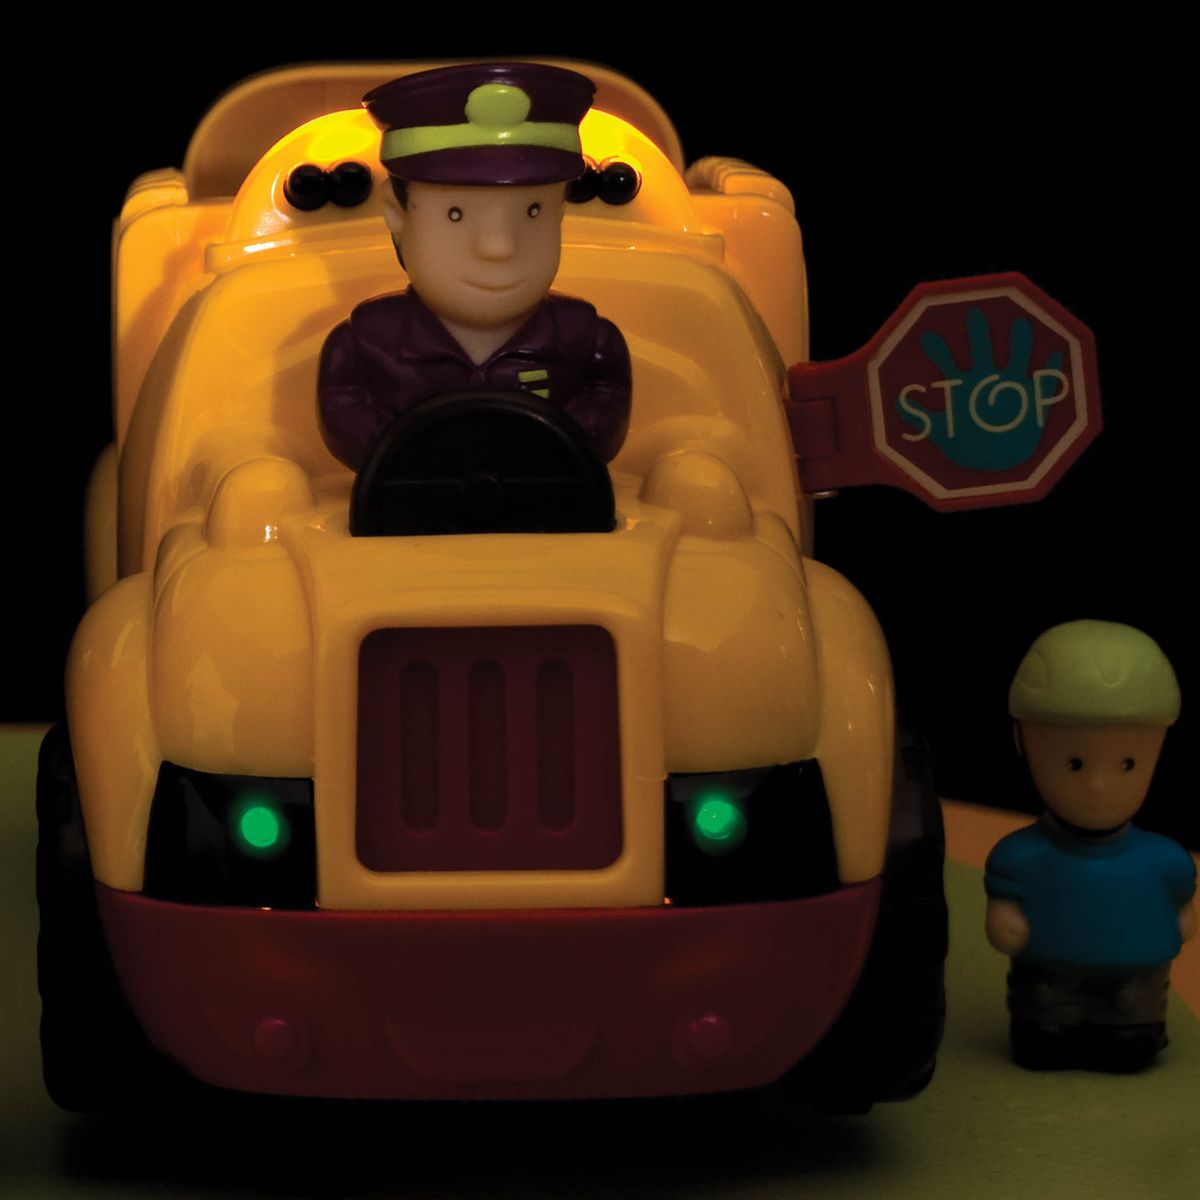 Toy school bus with driver and passengers